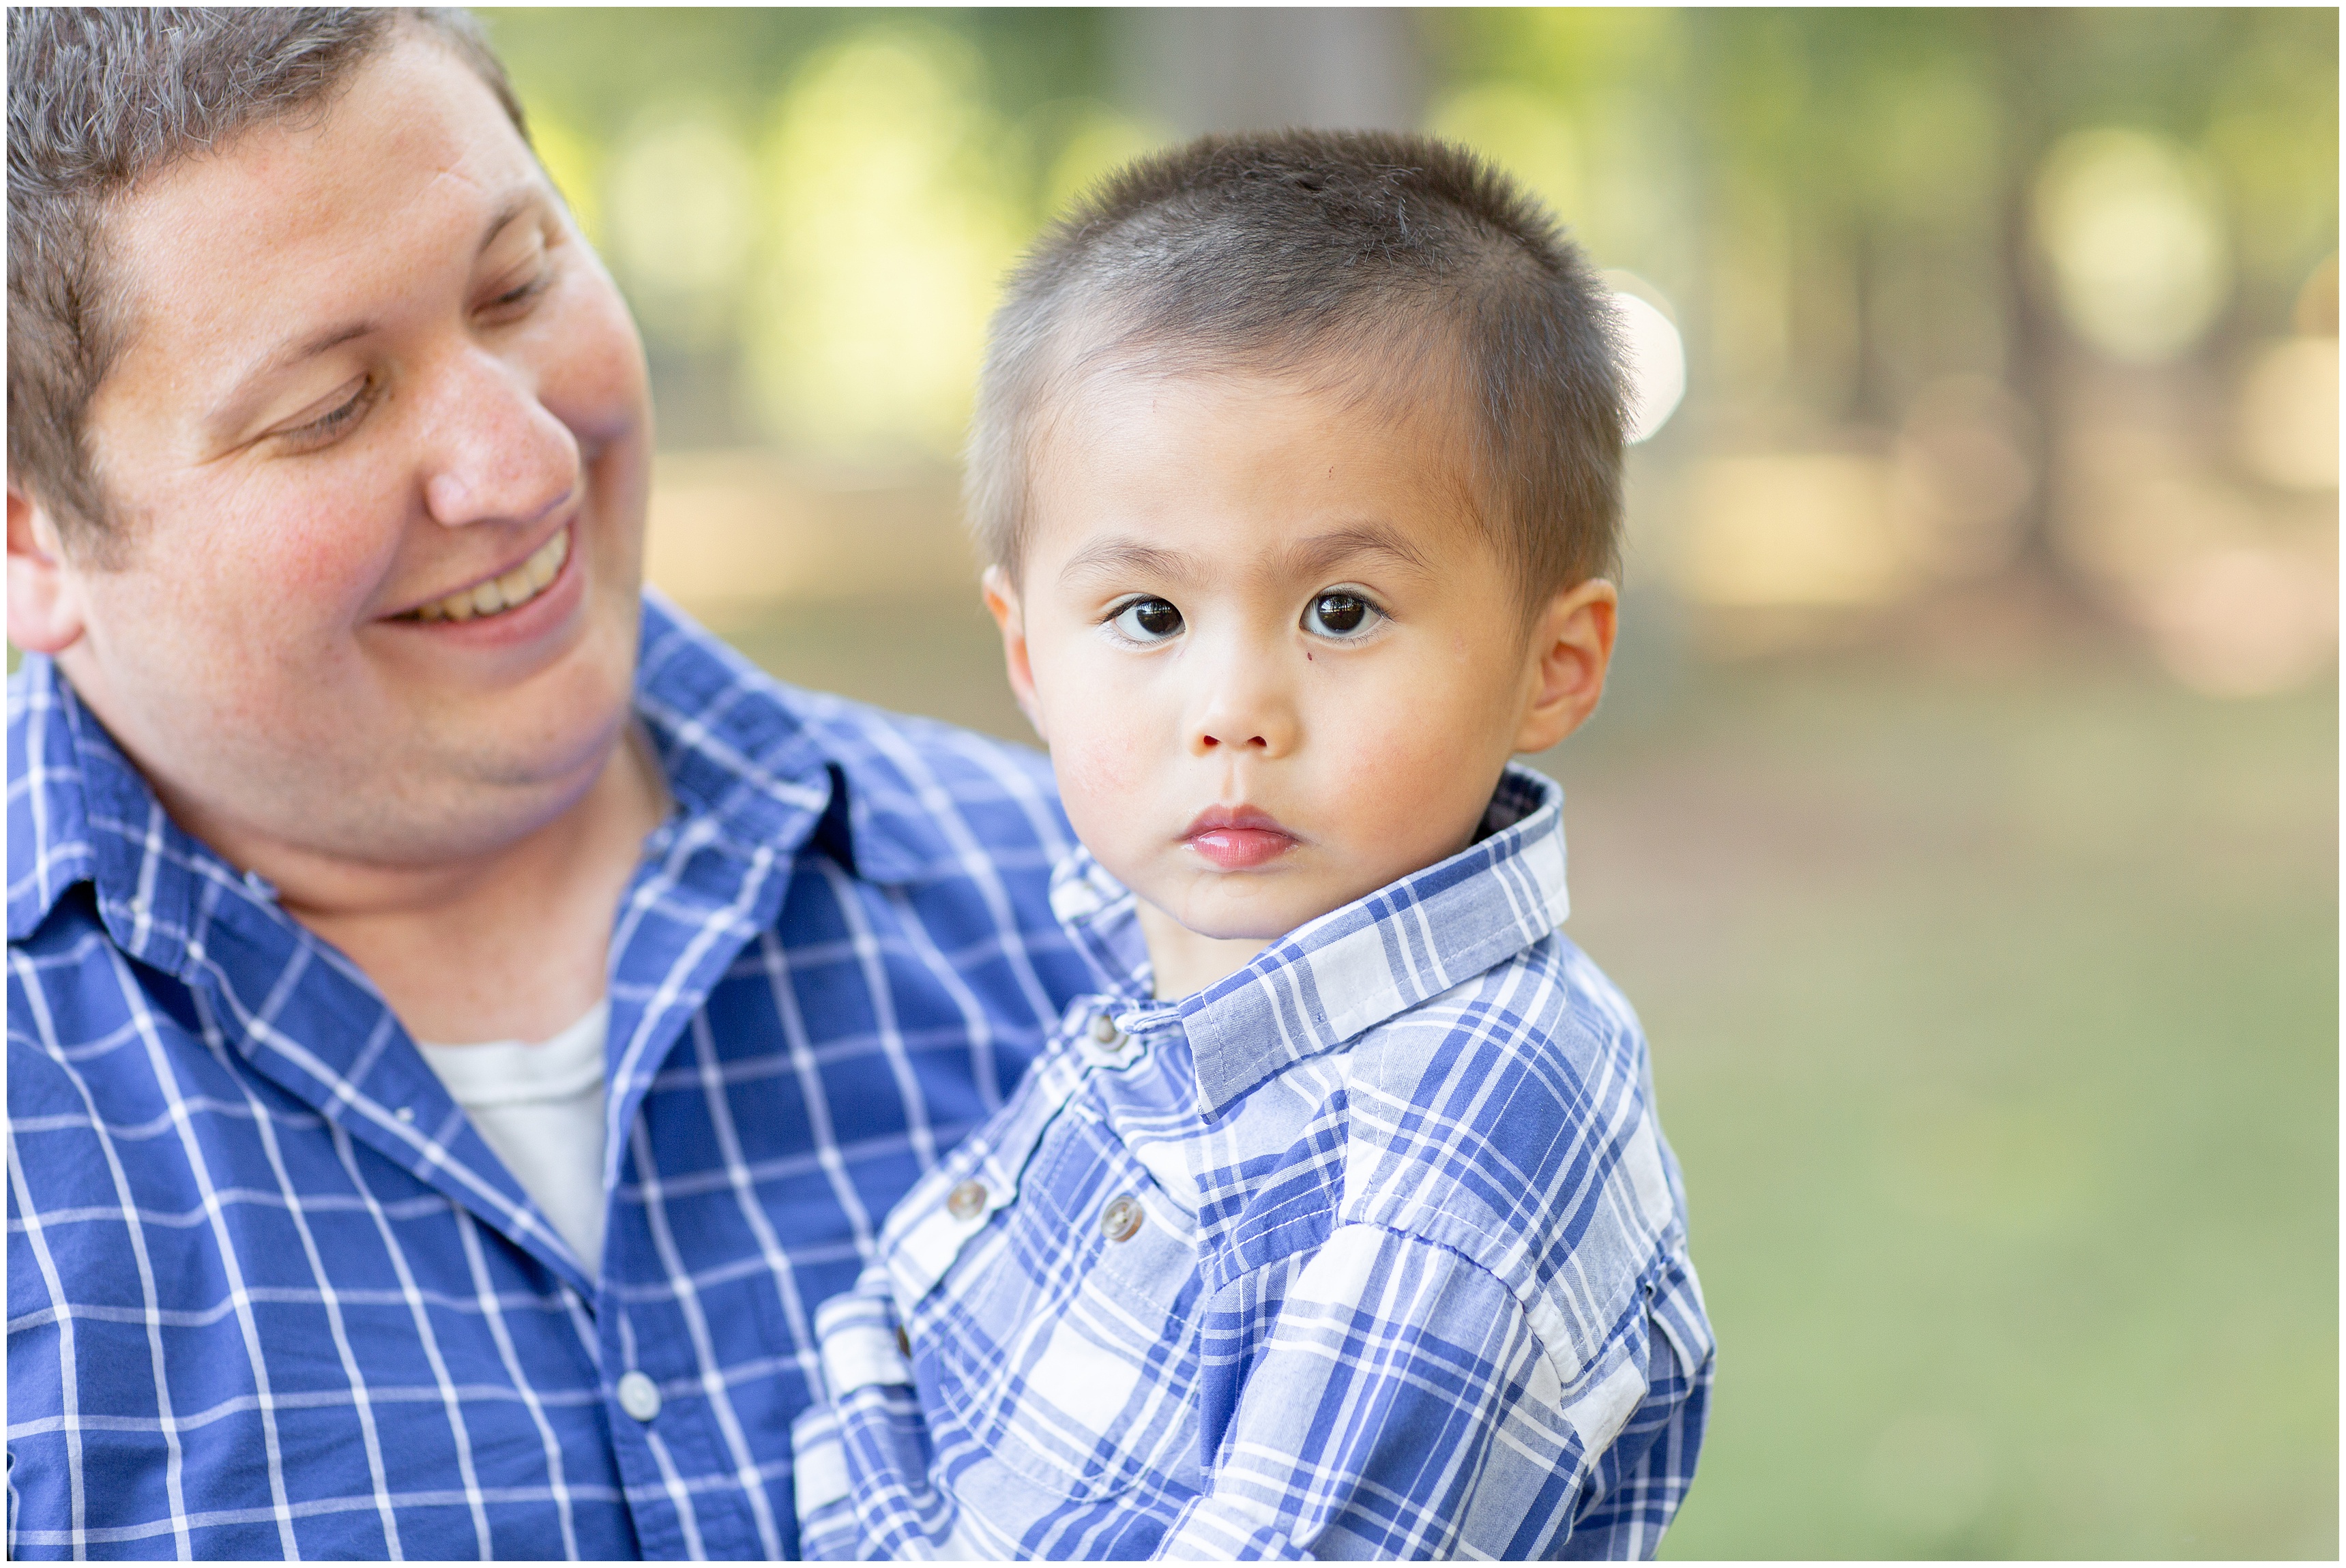 dad looks at son while he looks at photographer